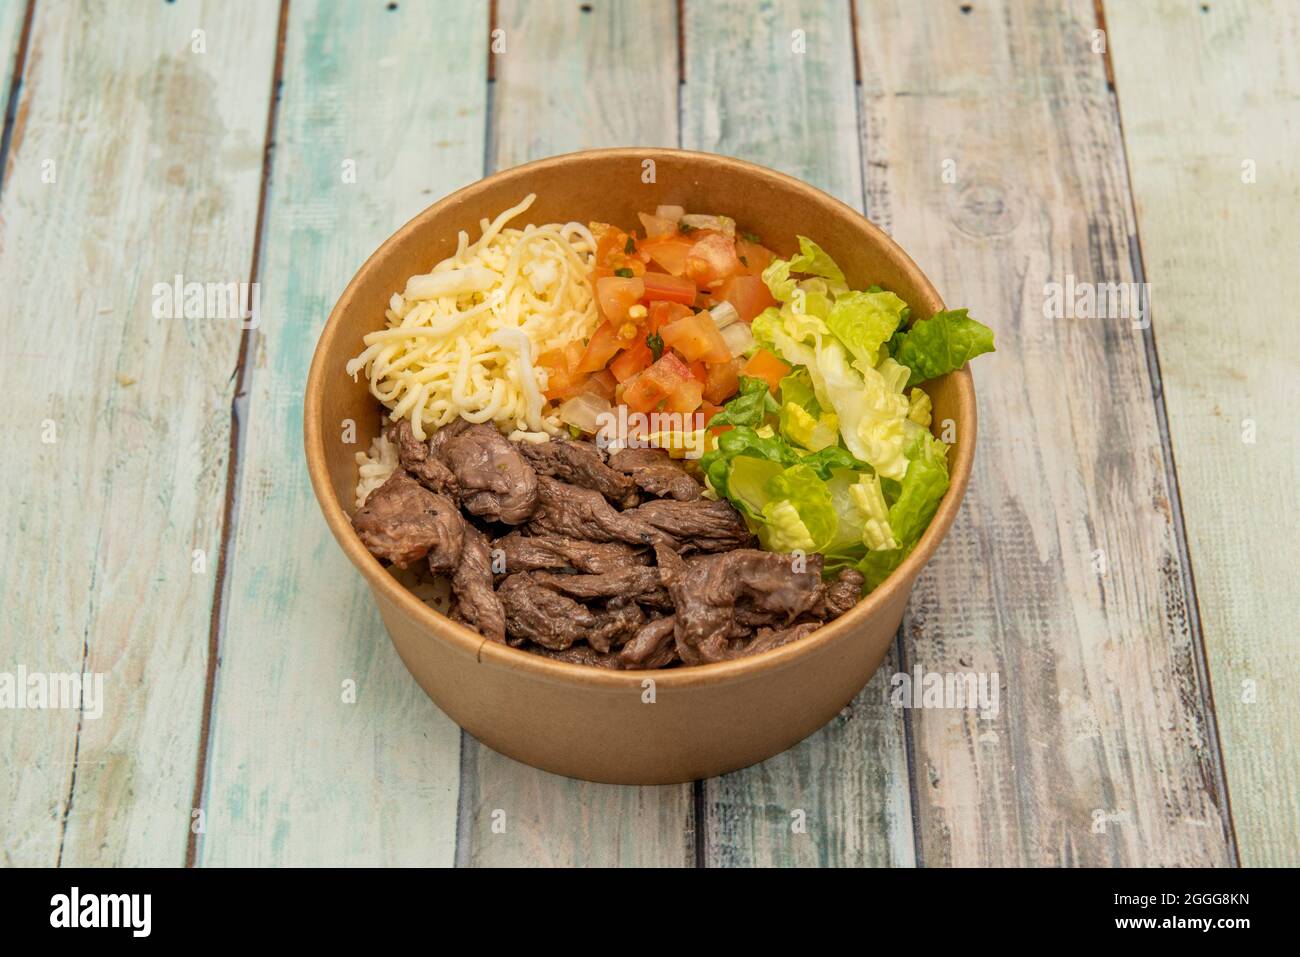 Grated cheese in plastic container on table Stock Photo - Alamy